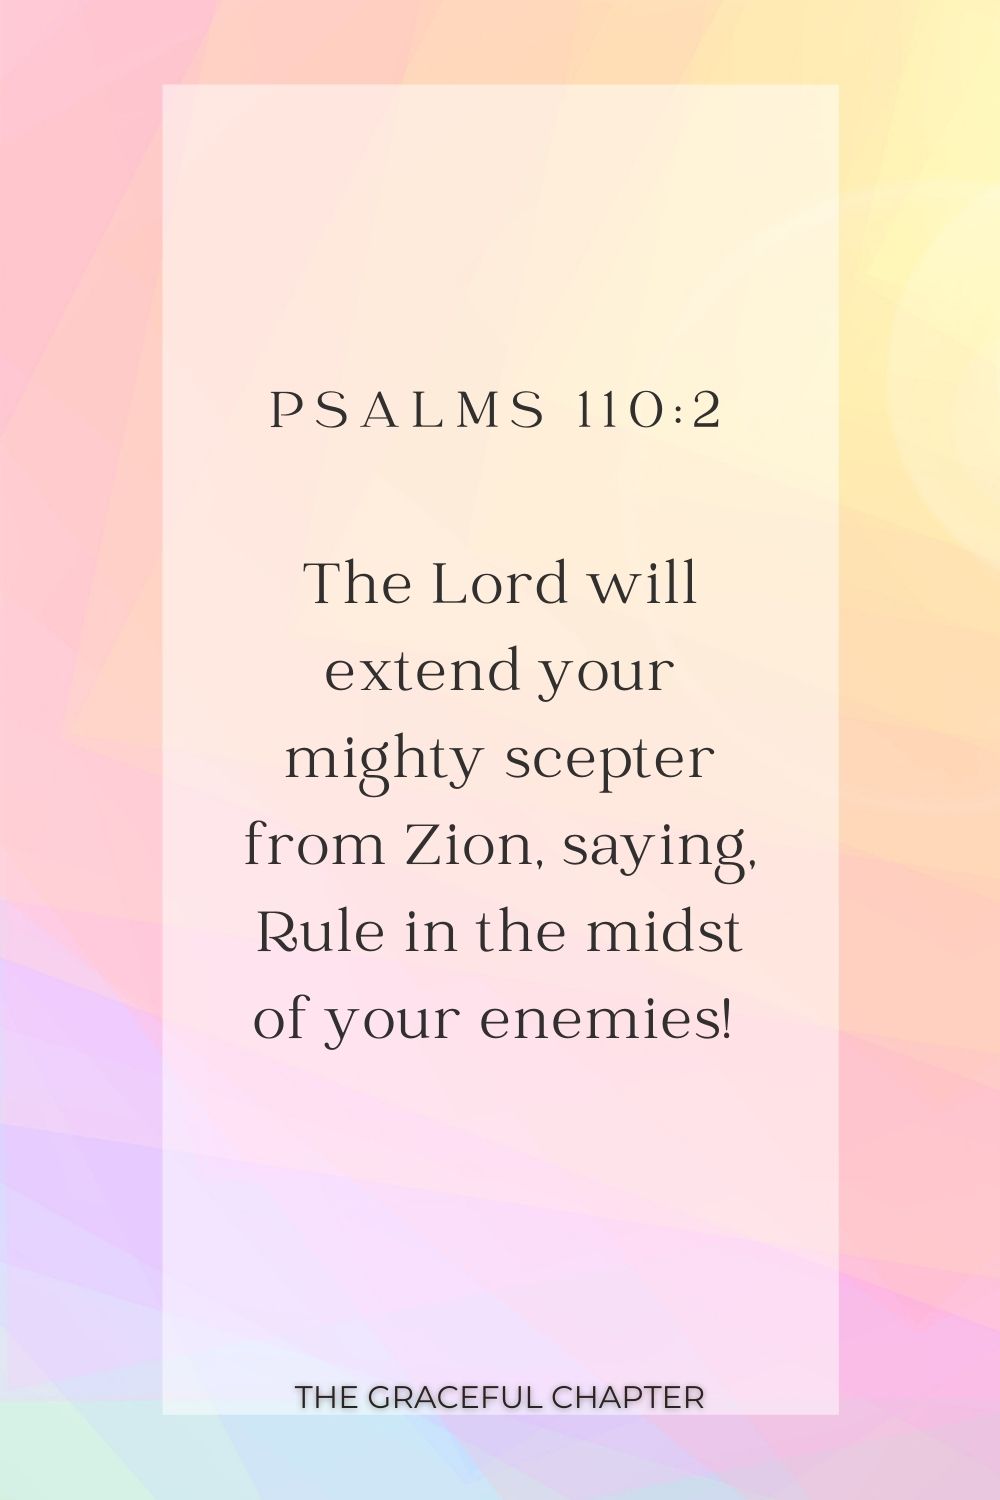 The Lord will extend your mighty scepter from Zion, saying, Rule in the midst of your enemies!  Psalms 110:2